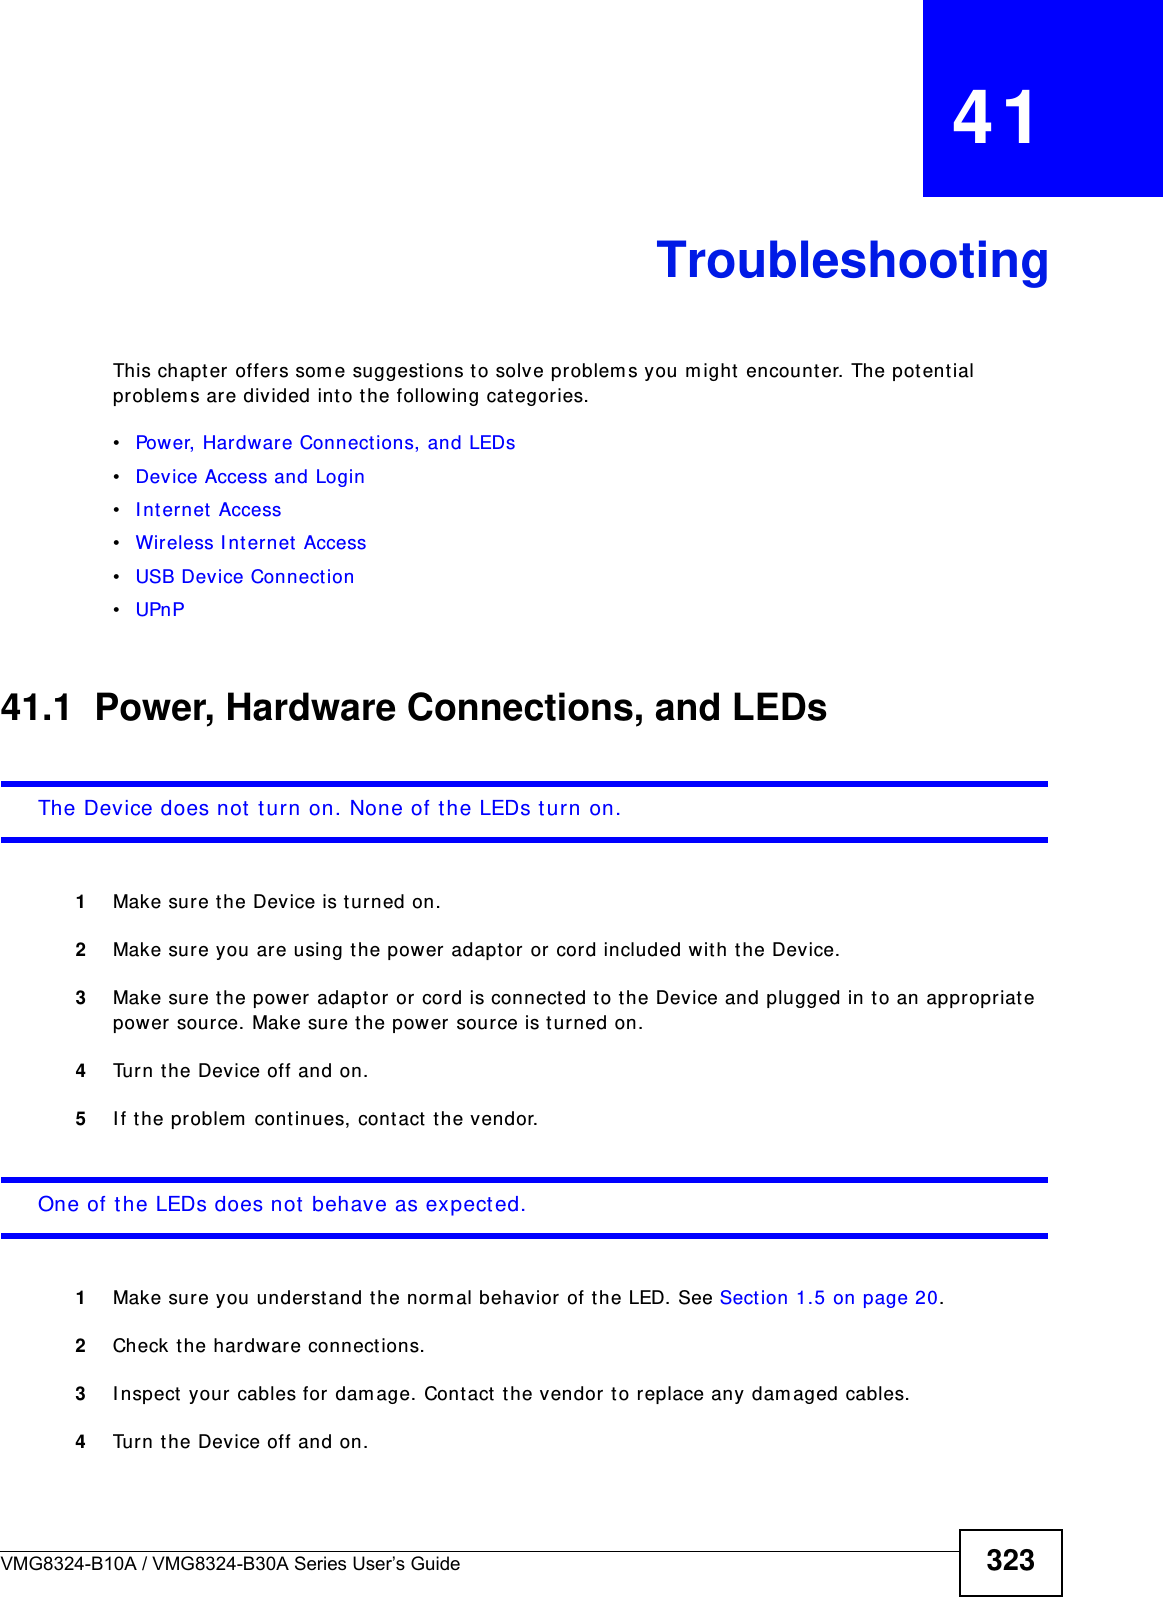 VMG8324-B10A / VMG8324-B30A Series User’s Guide 323CHAPTER   41TroubleshootingThis chapt er offers som e suggestions t o solve problem s you m ight  encount er. The potential problem s are divided int o t he following cat egories. •Power, Hardware Connections, and LEDs•Device Access and Login•I nternet  Access•Wireless I nt ernet  Access•USB Device Connection•UPnP41.1  Power, Hardware Connections, and LEDsThe Device does not  turn on. None of the LEDs t urn on.1Make sur e the Device is turned on. 2Make sur e you are using the power adapt or or cord included with the Device.3Make sur e the power adaptor or cord is connected to the Device and plugged in t o an appropriat e power source. Make sure the power source is turned on.4Turn t he Device off and on.5I f the problem  continues, contact the vendor.One of the LEDs does not  behave as expected.1Make sur e you underst and t he norm al behavior of the LED. See Sect ion 1.5 on page 20.2Check the hardware connect ions.3I nspect your cables for dam age. Contact the vendor to replace any dam aged cables.4Turn t he Device off and on.